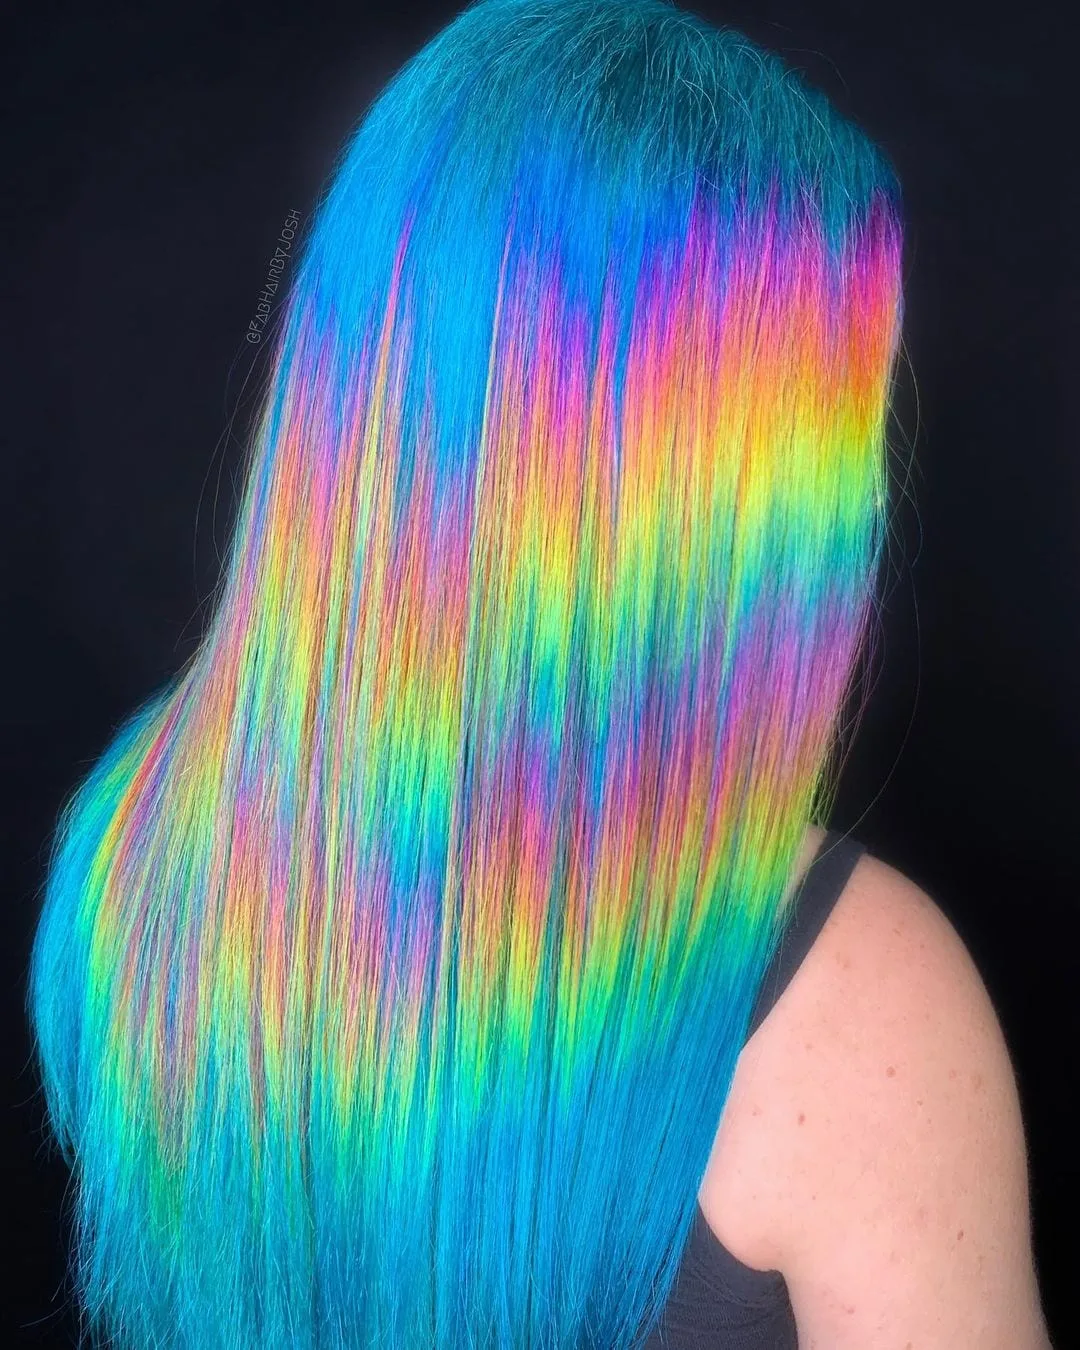 Ocean halographic hairstyle featuring wave and sunset-like hair against black background